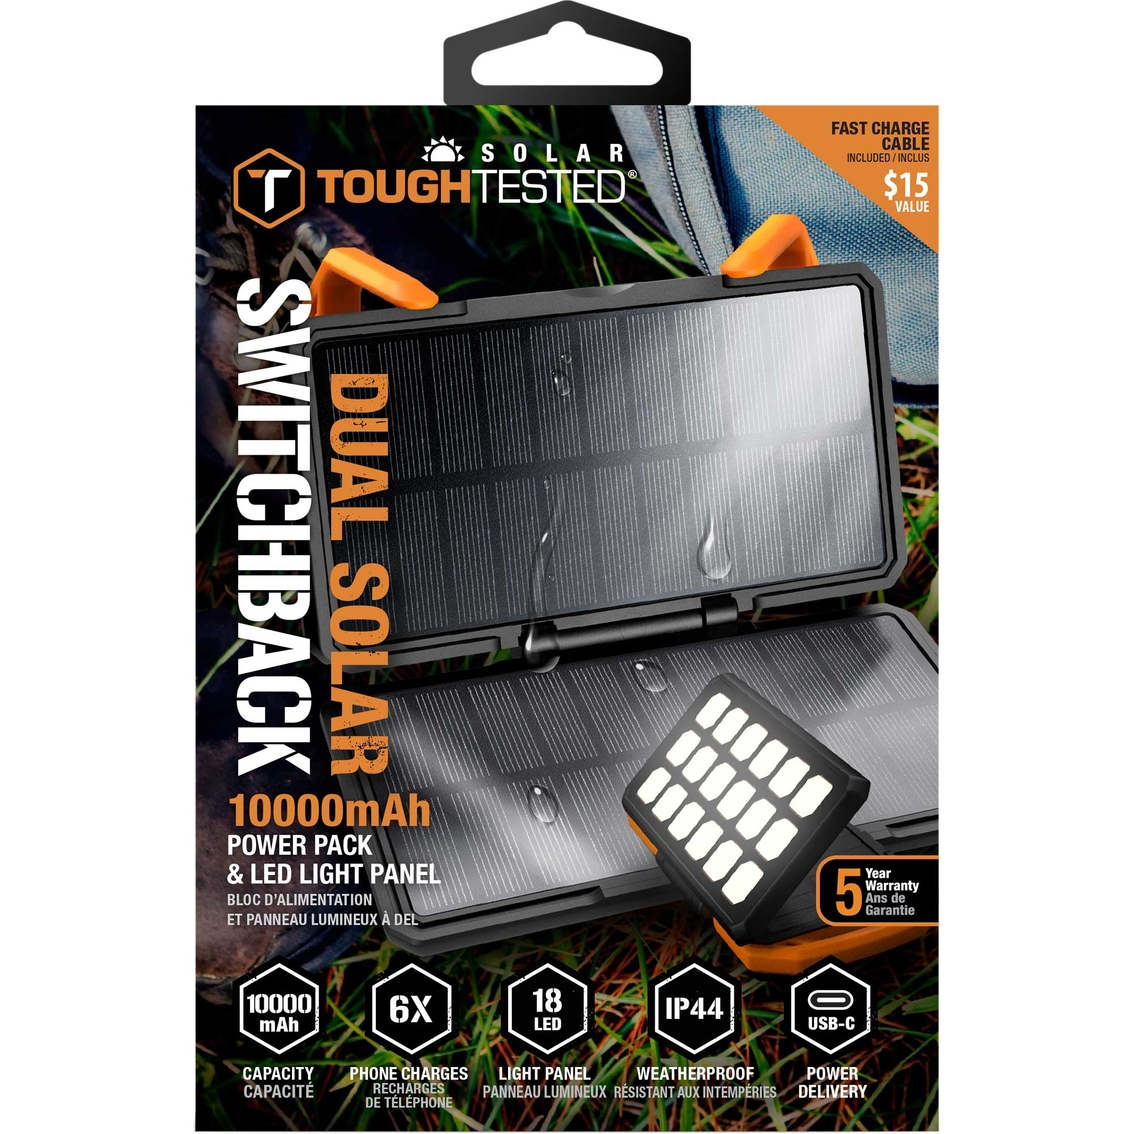 ToughTested Switchback 10000 mAh PowerBank - Image 2 of 6